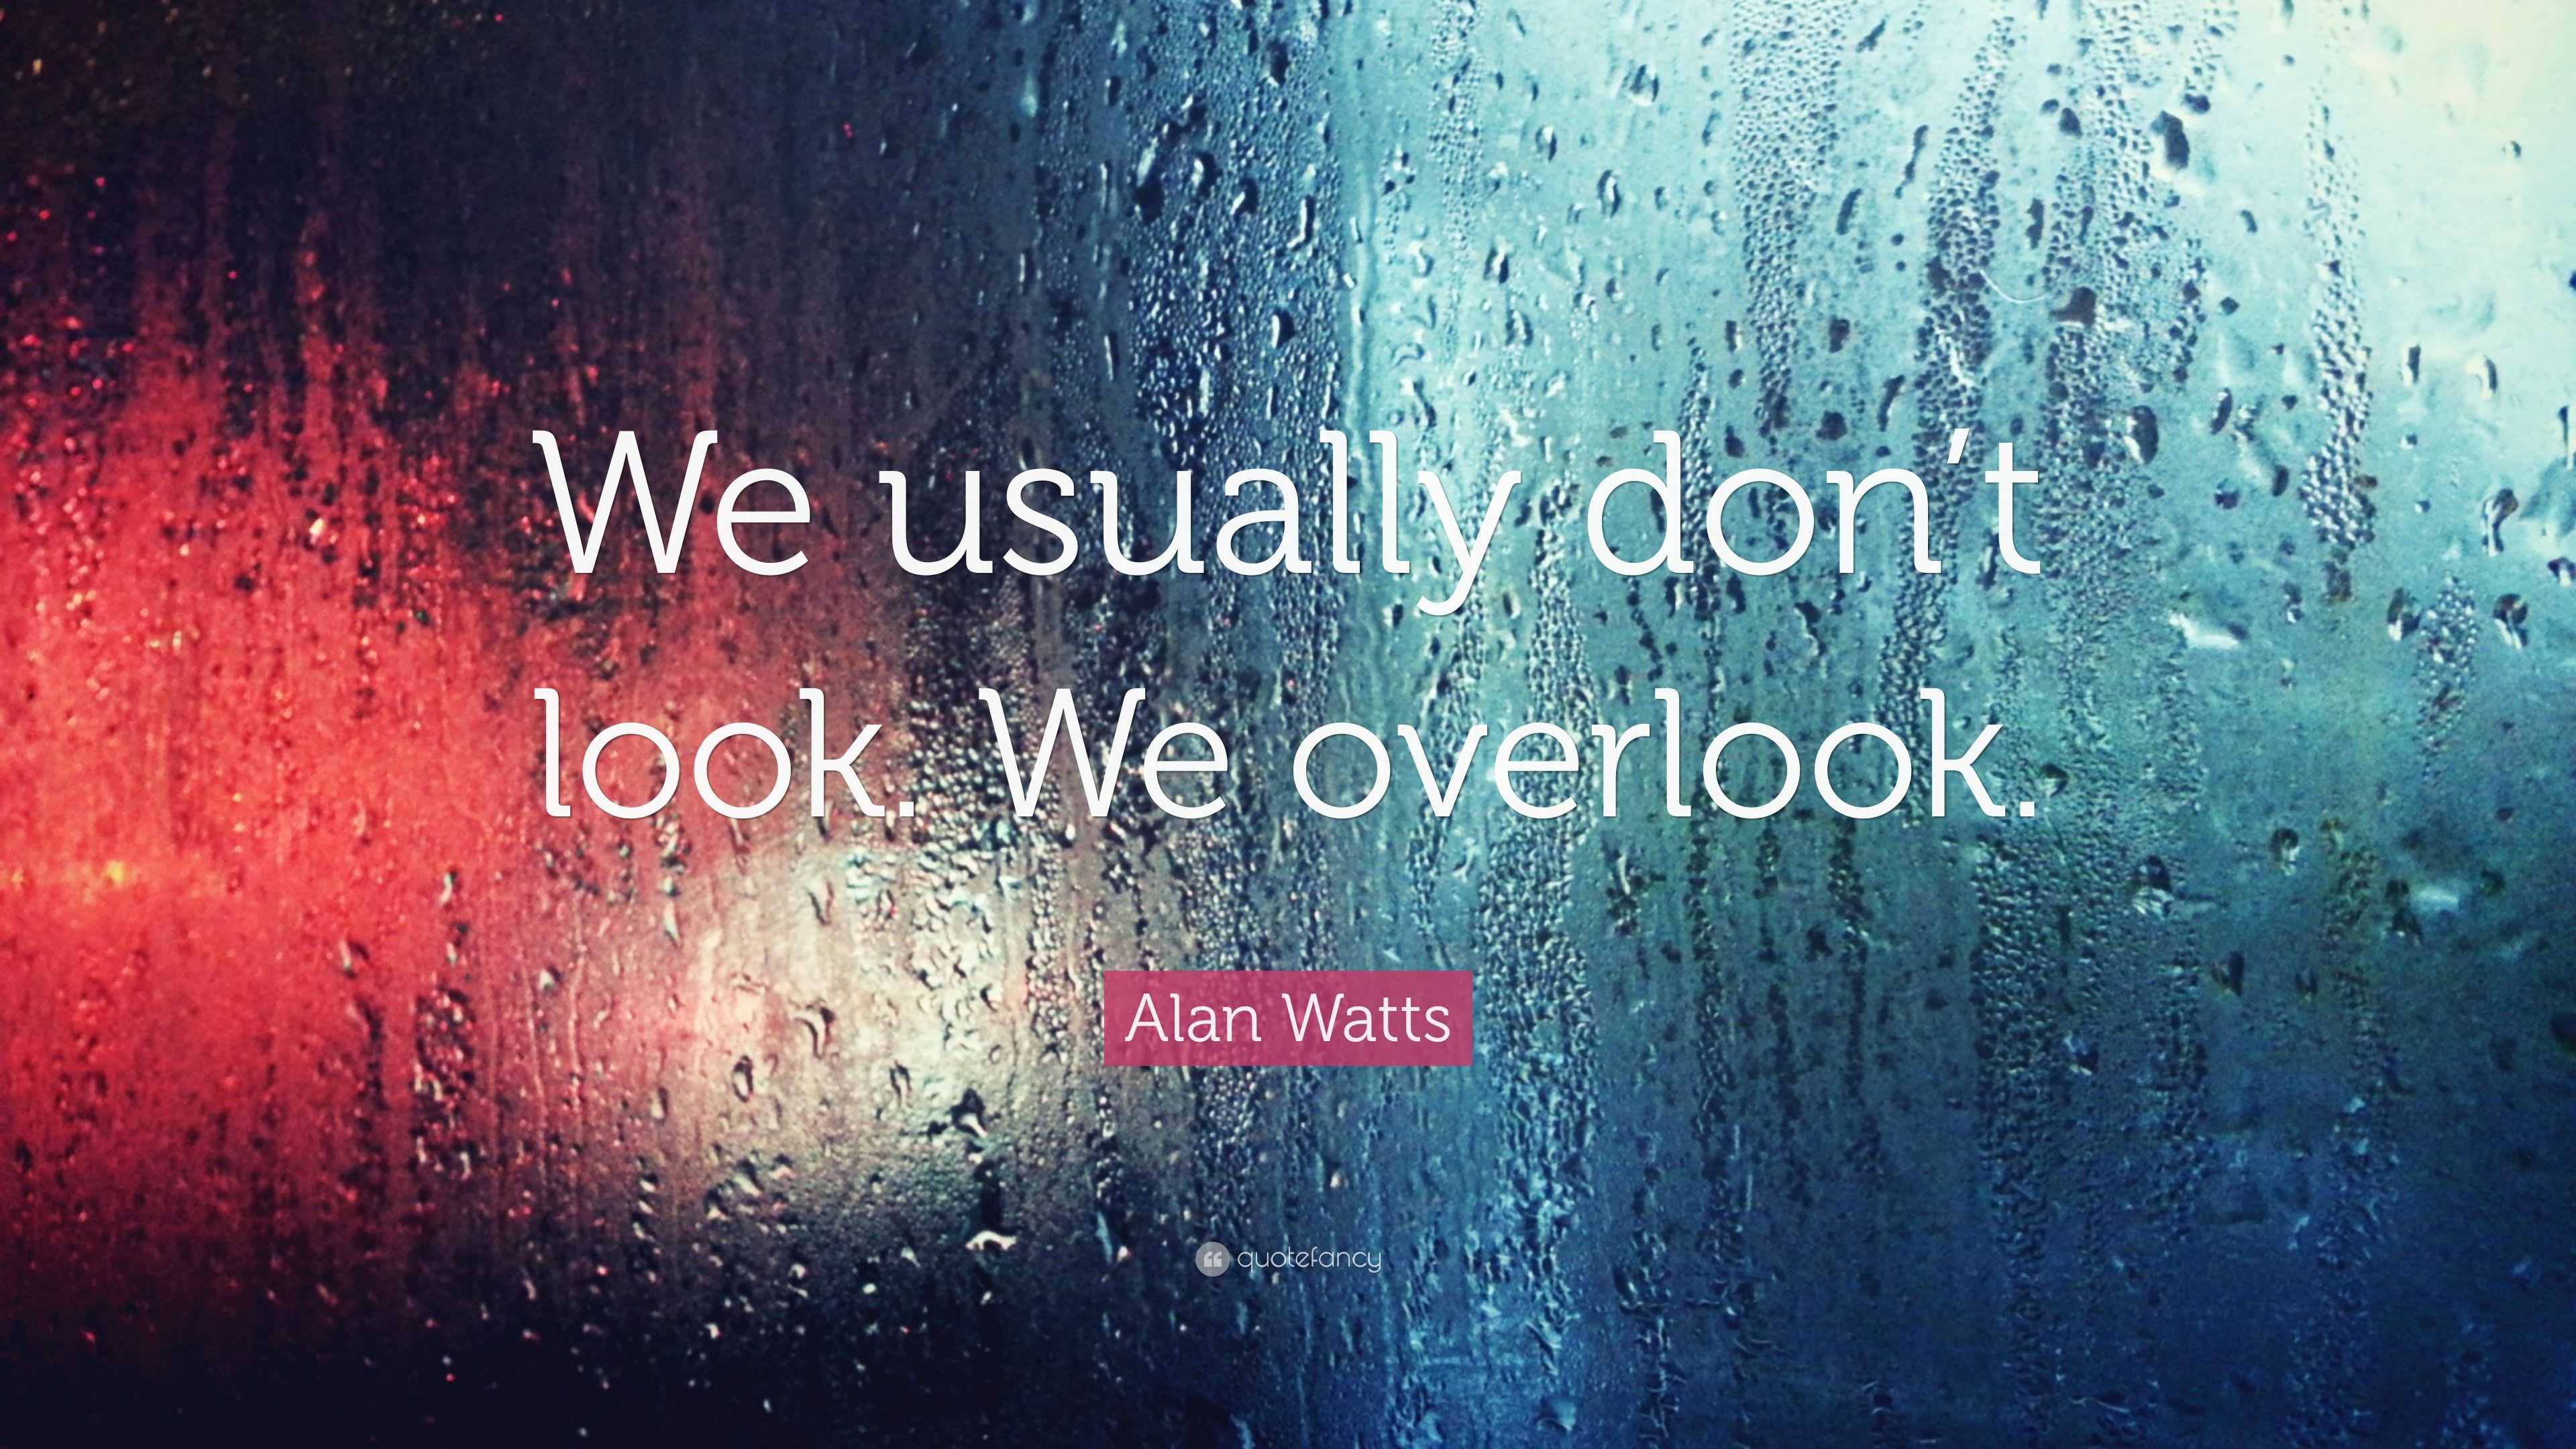 Alan Watts Quote “We usually don t look We overlook ”